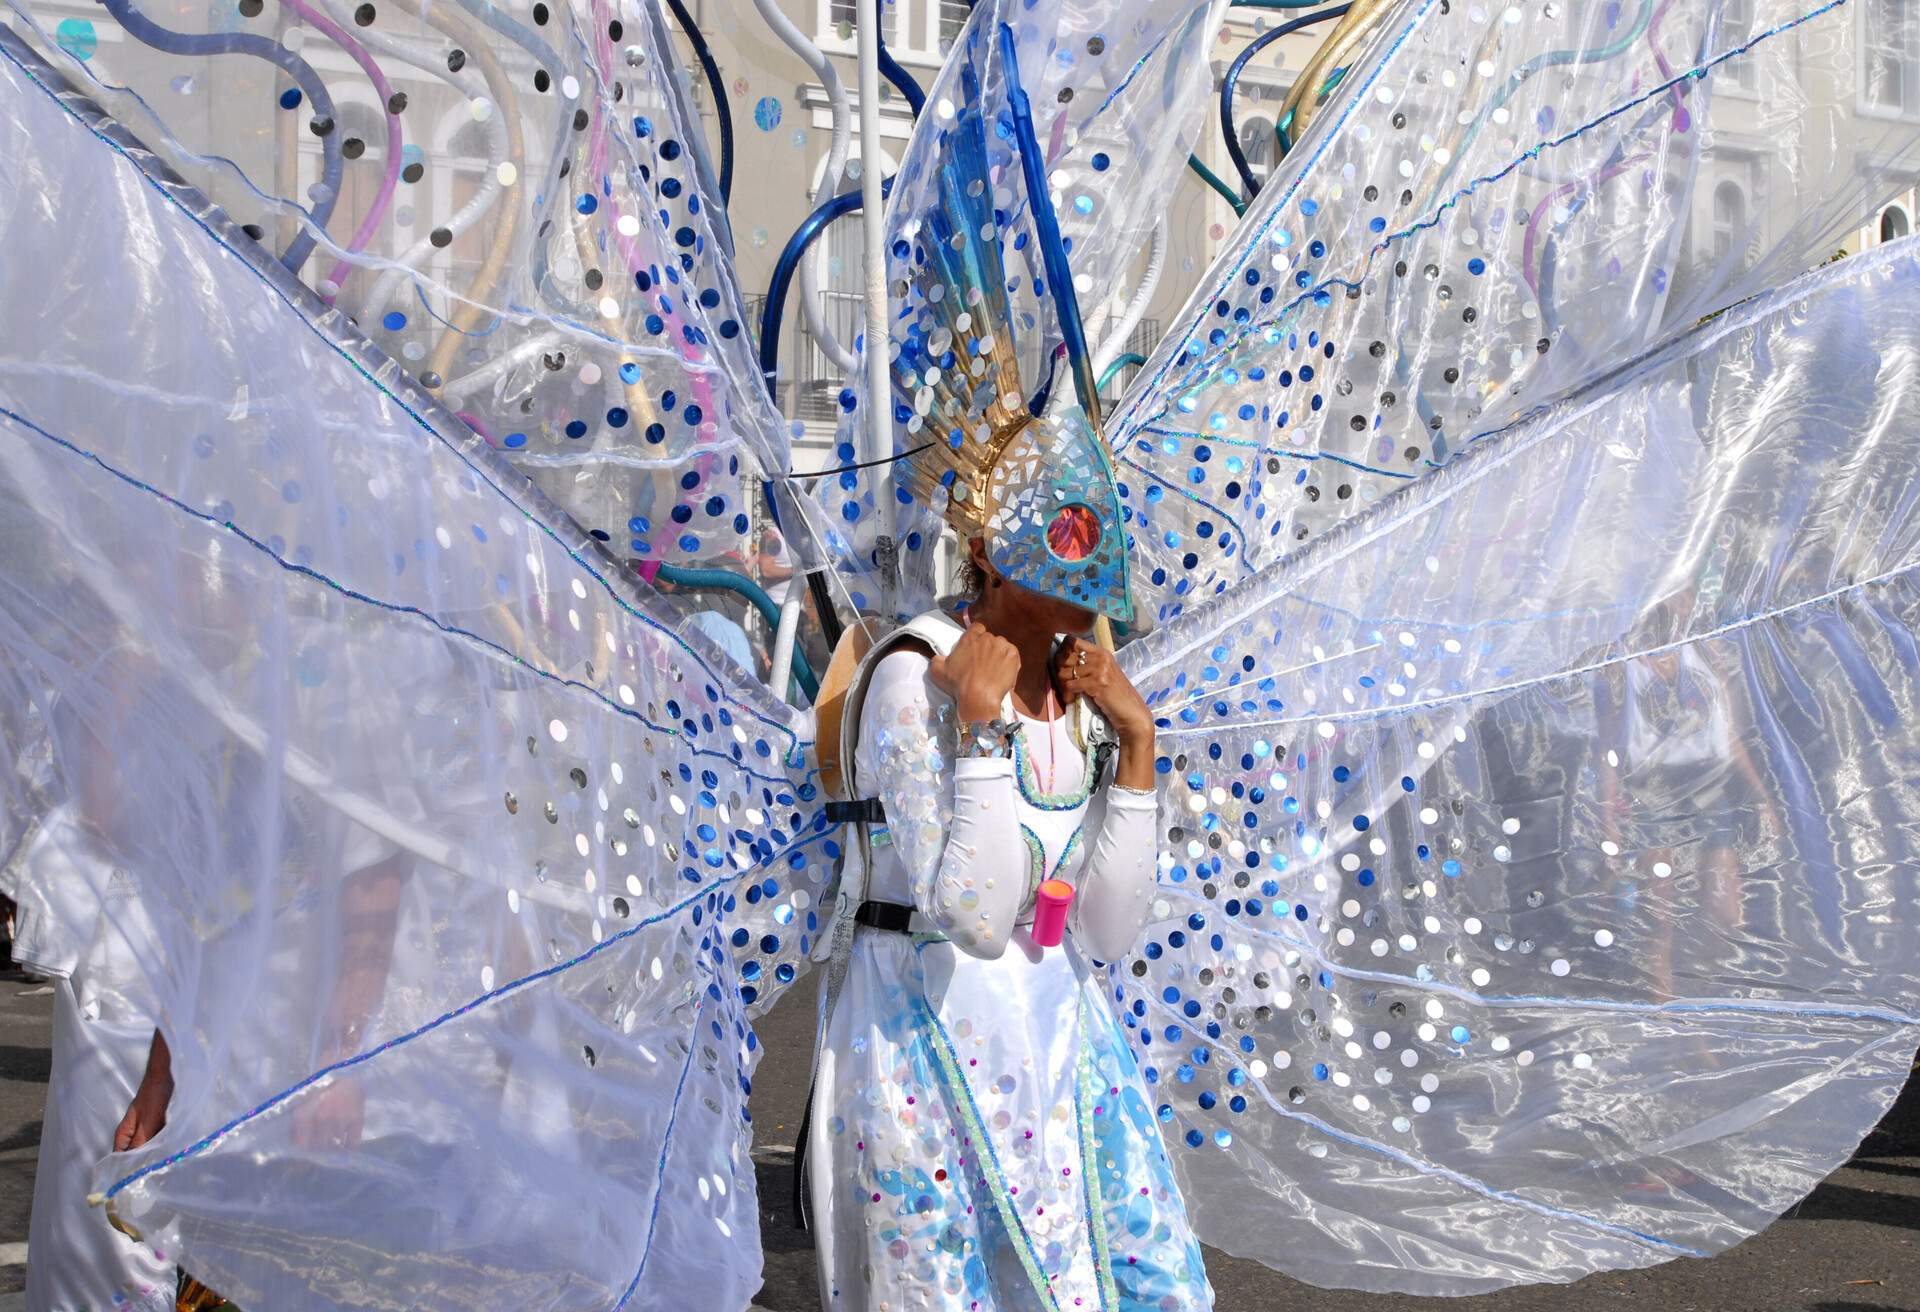 One of the many flamboyant costumes at the Notting Hill Carnival, London.